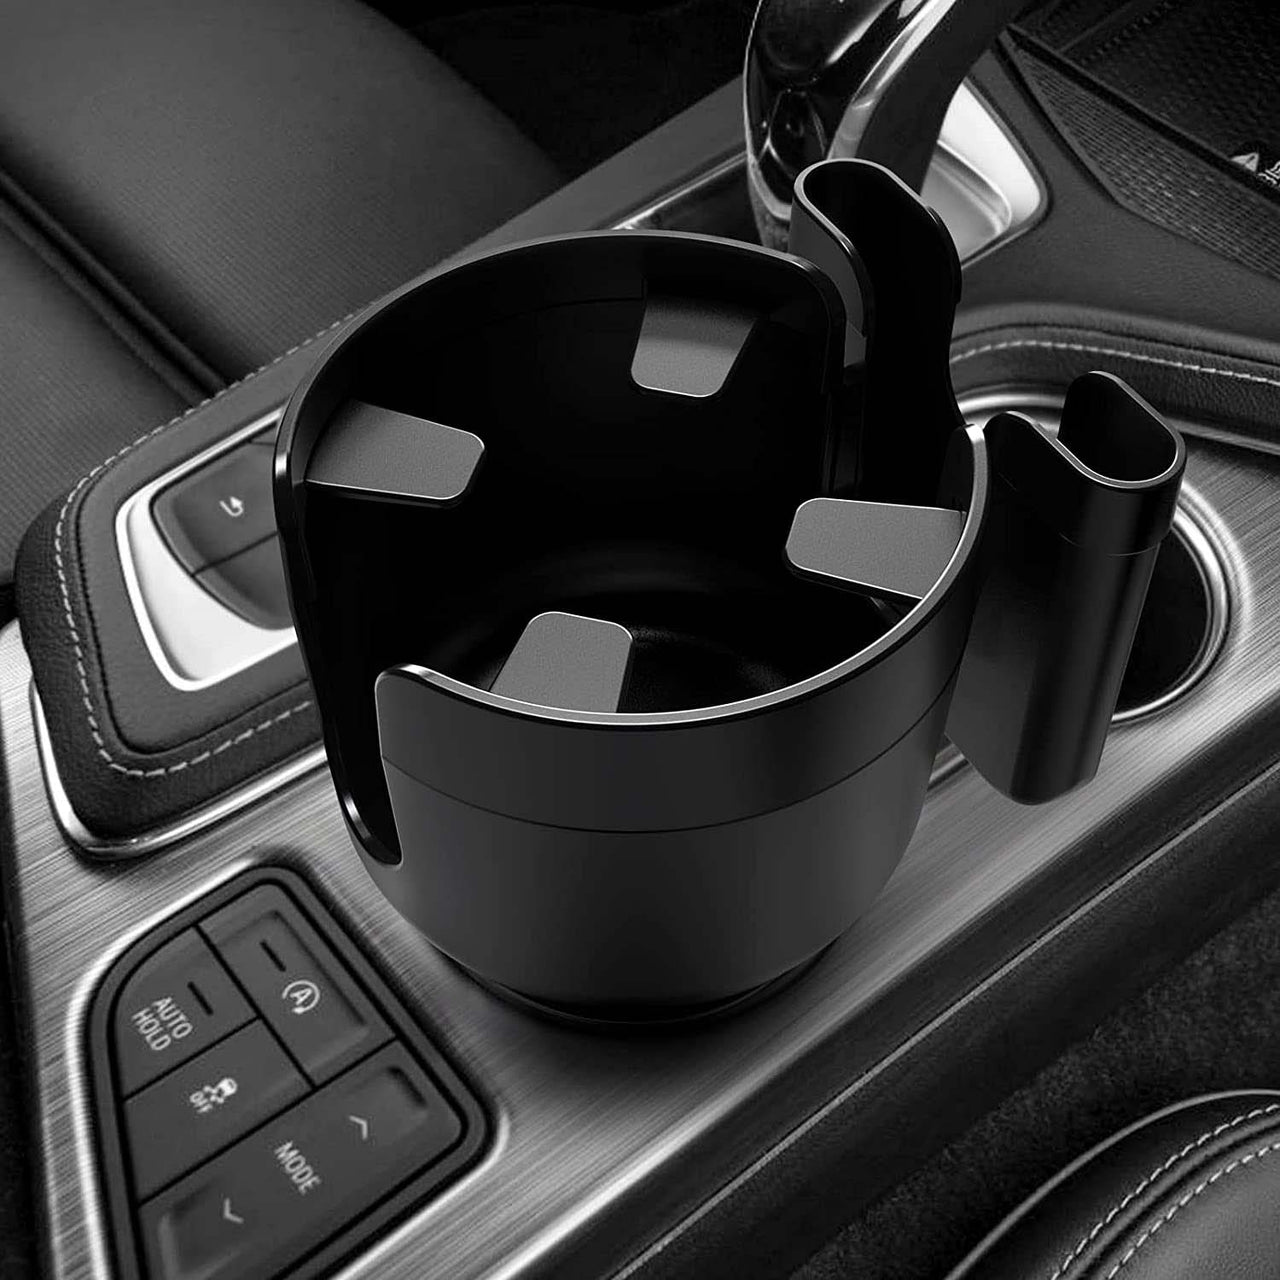 2-in-1 Car Cup Holder Expander Adapter with Adjustable Base, Custom Fit For Your Cars, Car Cup Holder Expander Organizer with Phone Holder, Fits 32/40 oz Drinks Bottles, Car Accessories NS15988